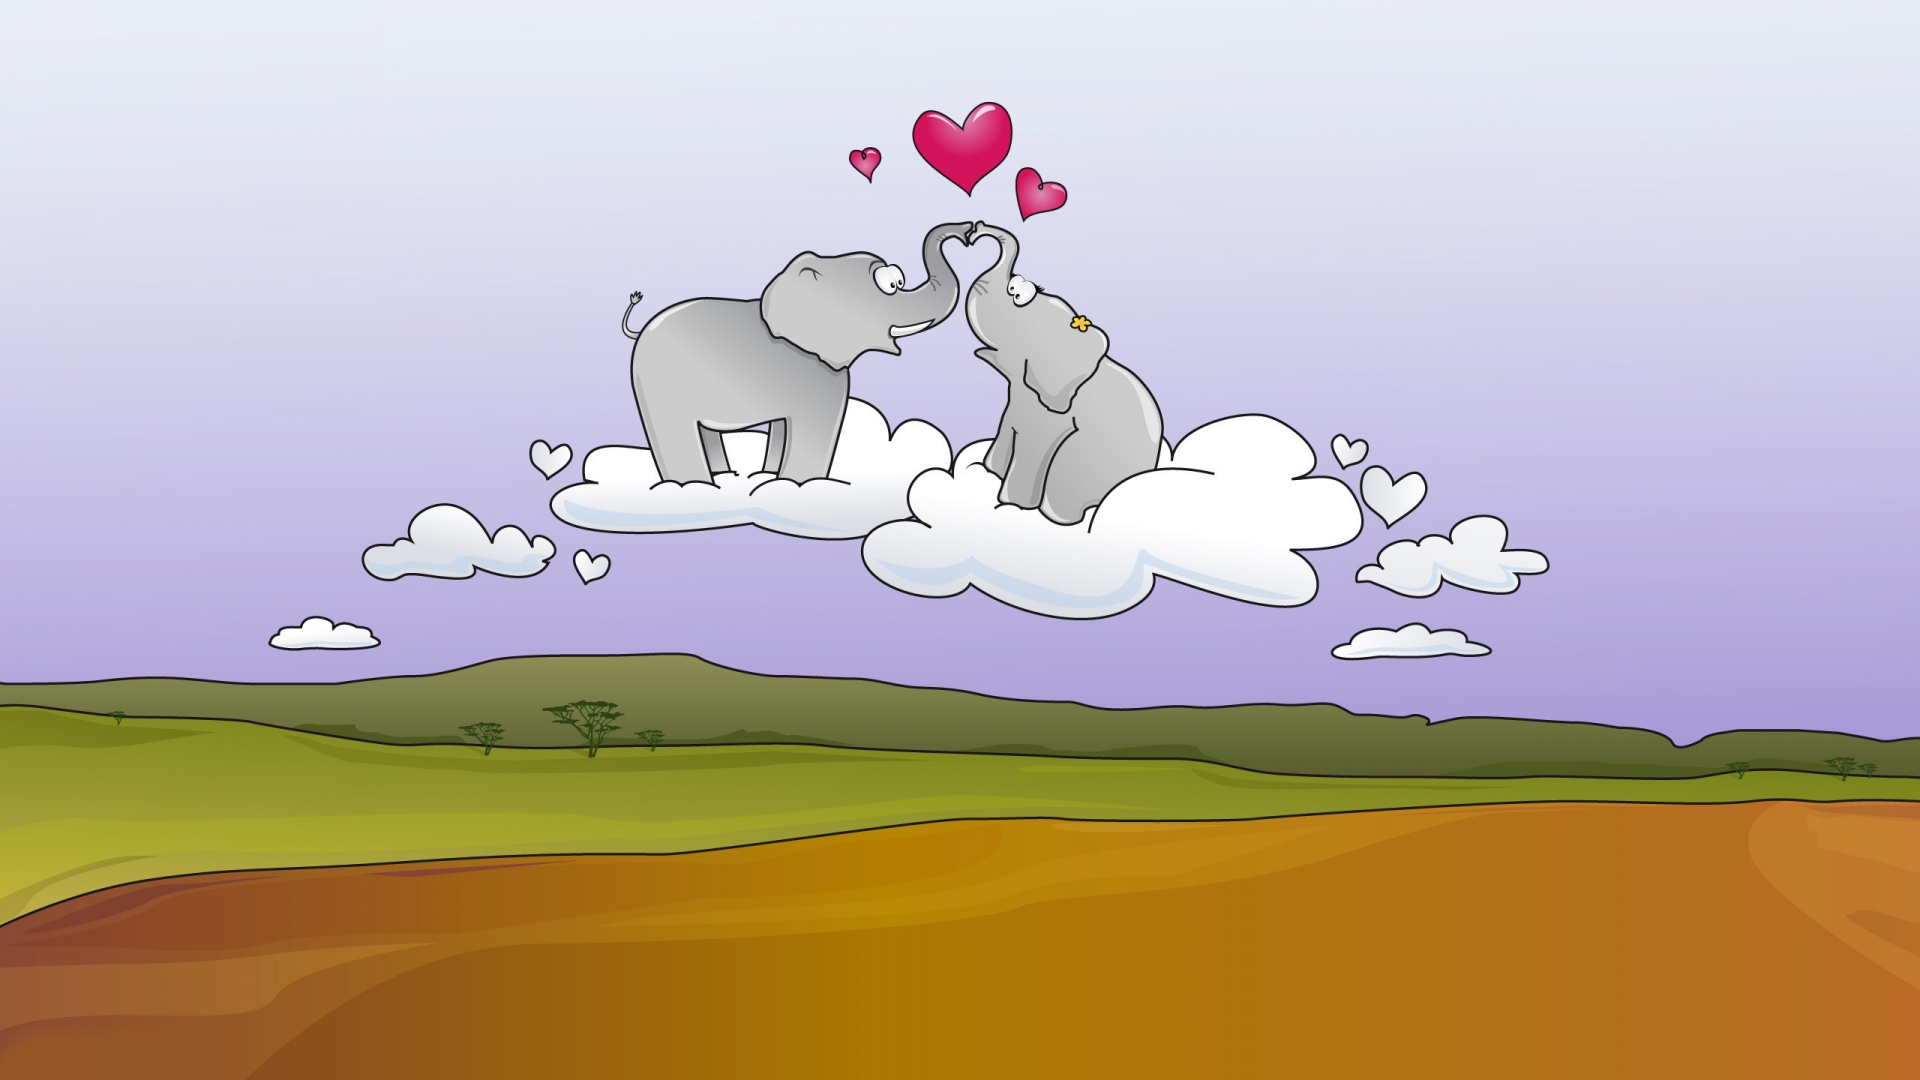 Love is in The Air for 1920 x 1080 HDTV 1080p resolution